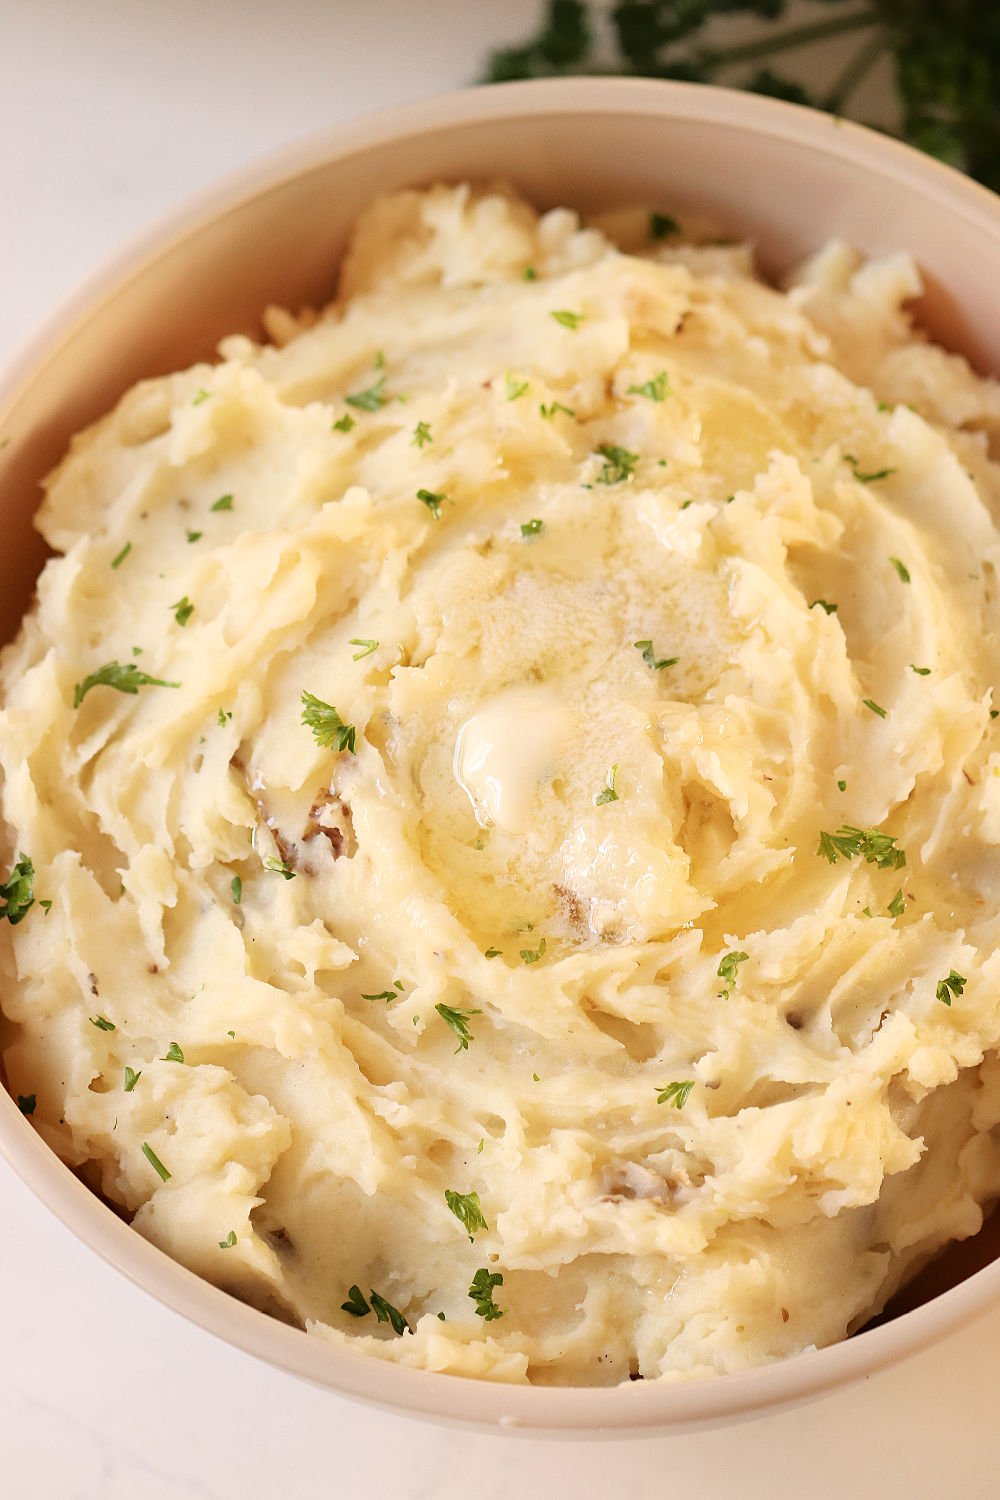 How to Make our Instant Pot Mashed Potatoes Recipe